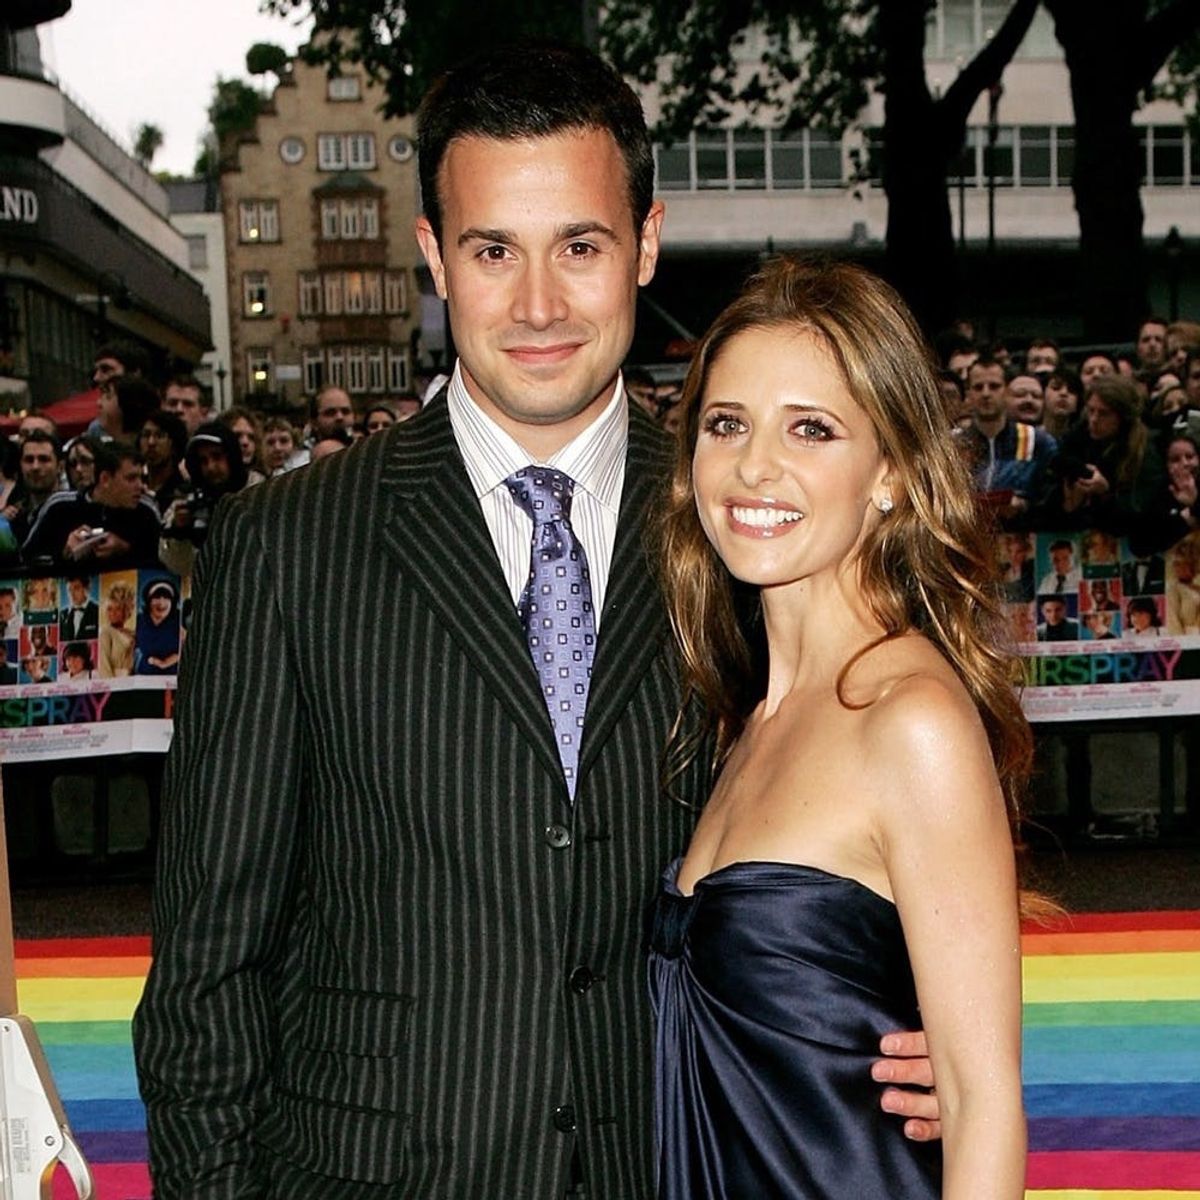 This Is the Super Sweet Way Sarah Michelle Gellar Honored Her 15th Anniversary With Freddie Prinze Jr.